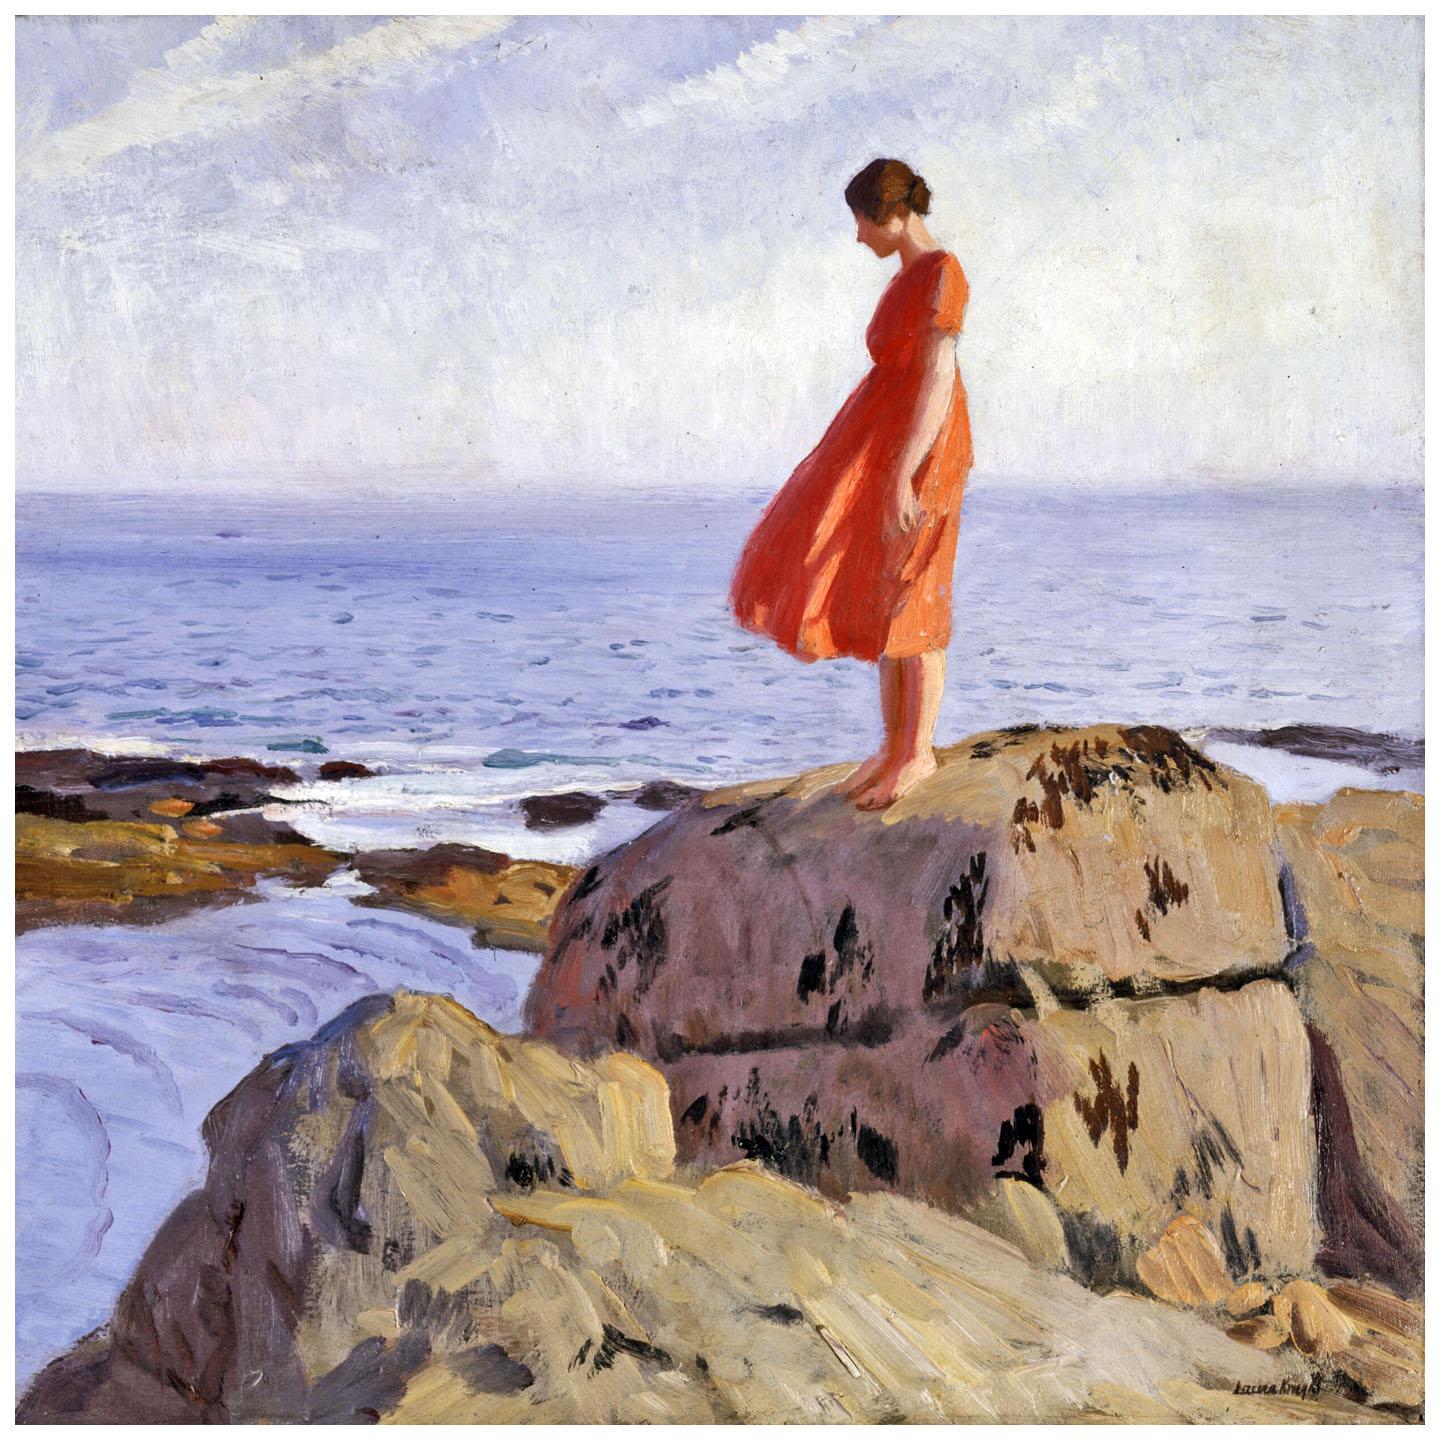 Laura Knight. The Dark Pool. 1918. Tyne and Wear Museum Newcastle